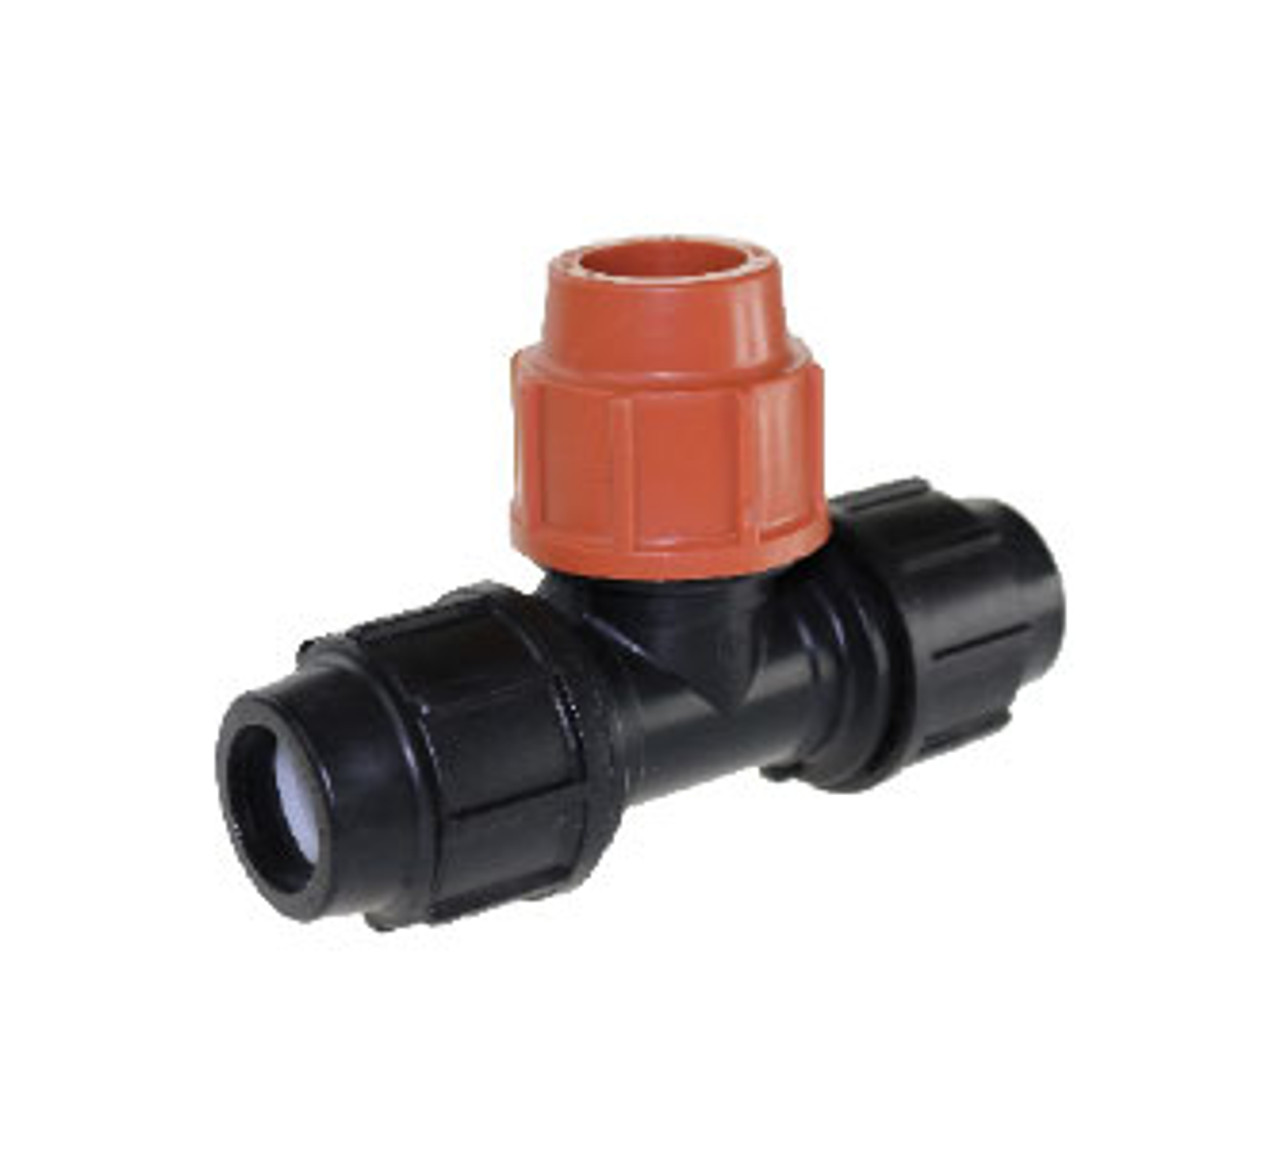 UltraAir Metric Compression 90 Degree Tee Connector - Poly to Copper 25 x 20